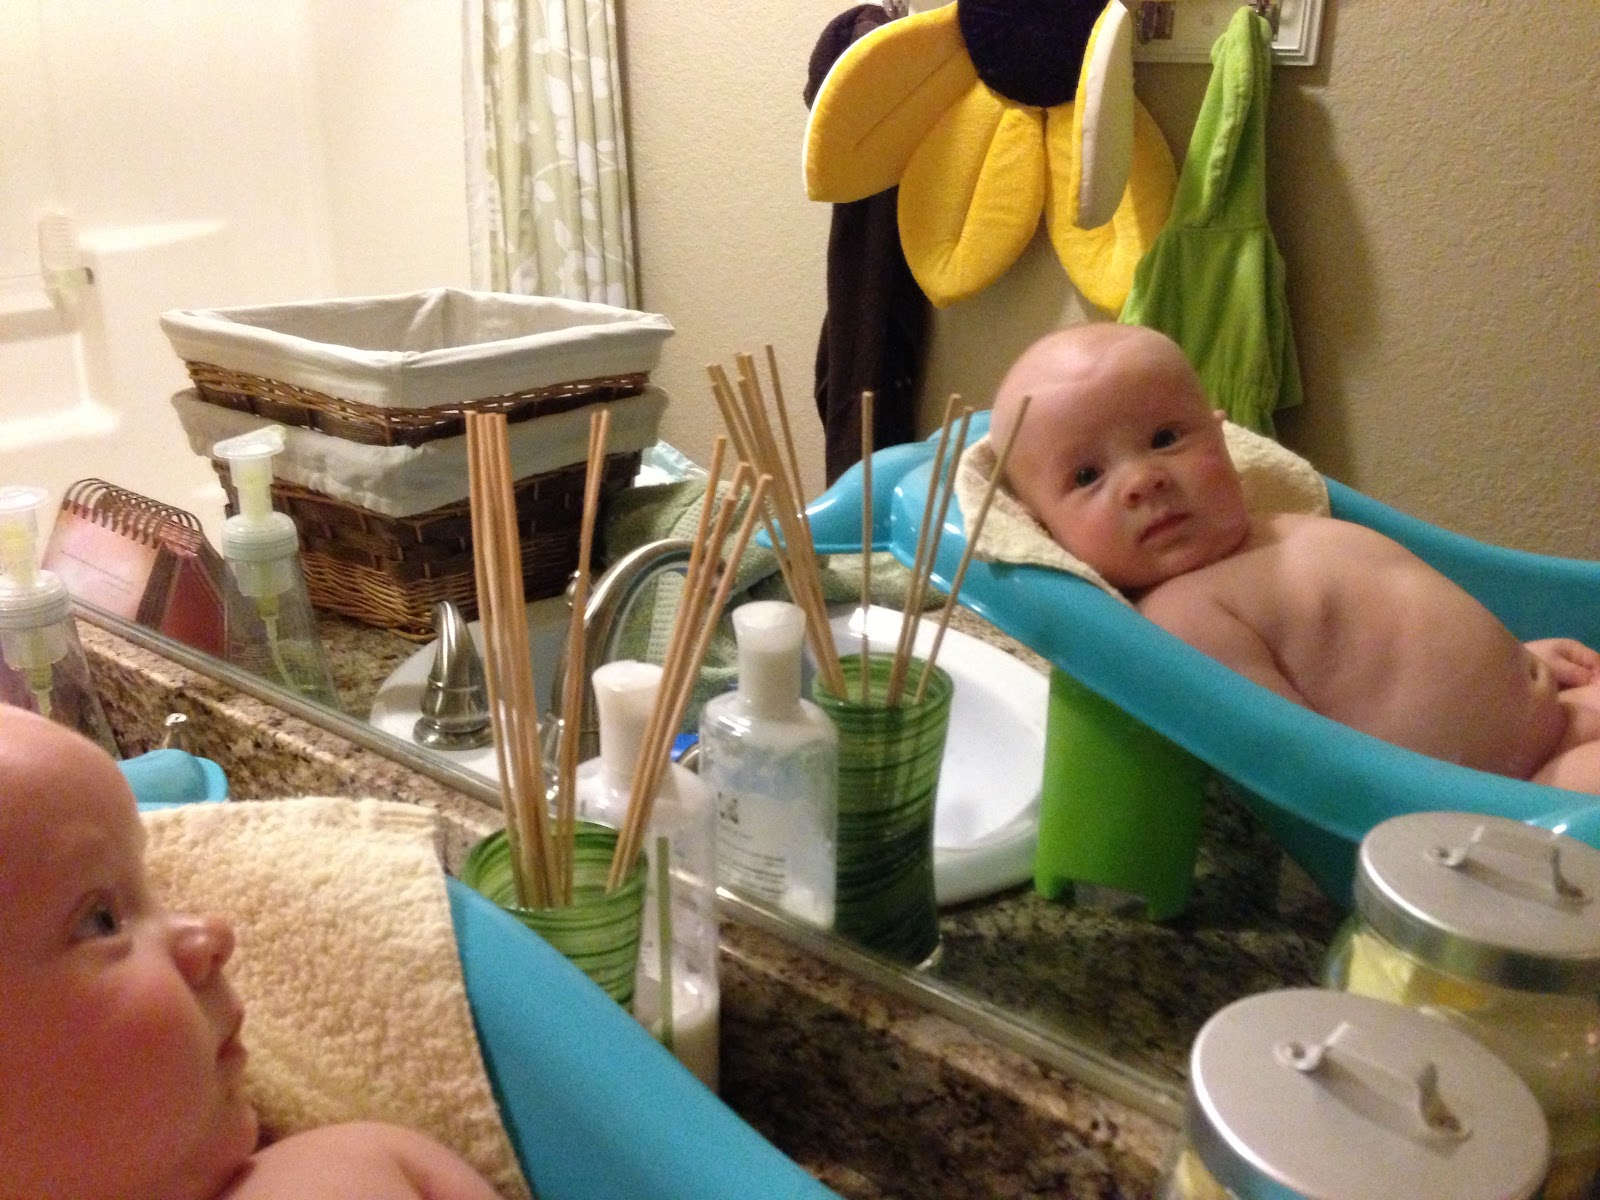 After the Storks: "Rub a dub dub, get me out of the tub ...